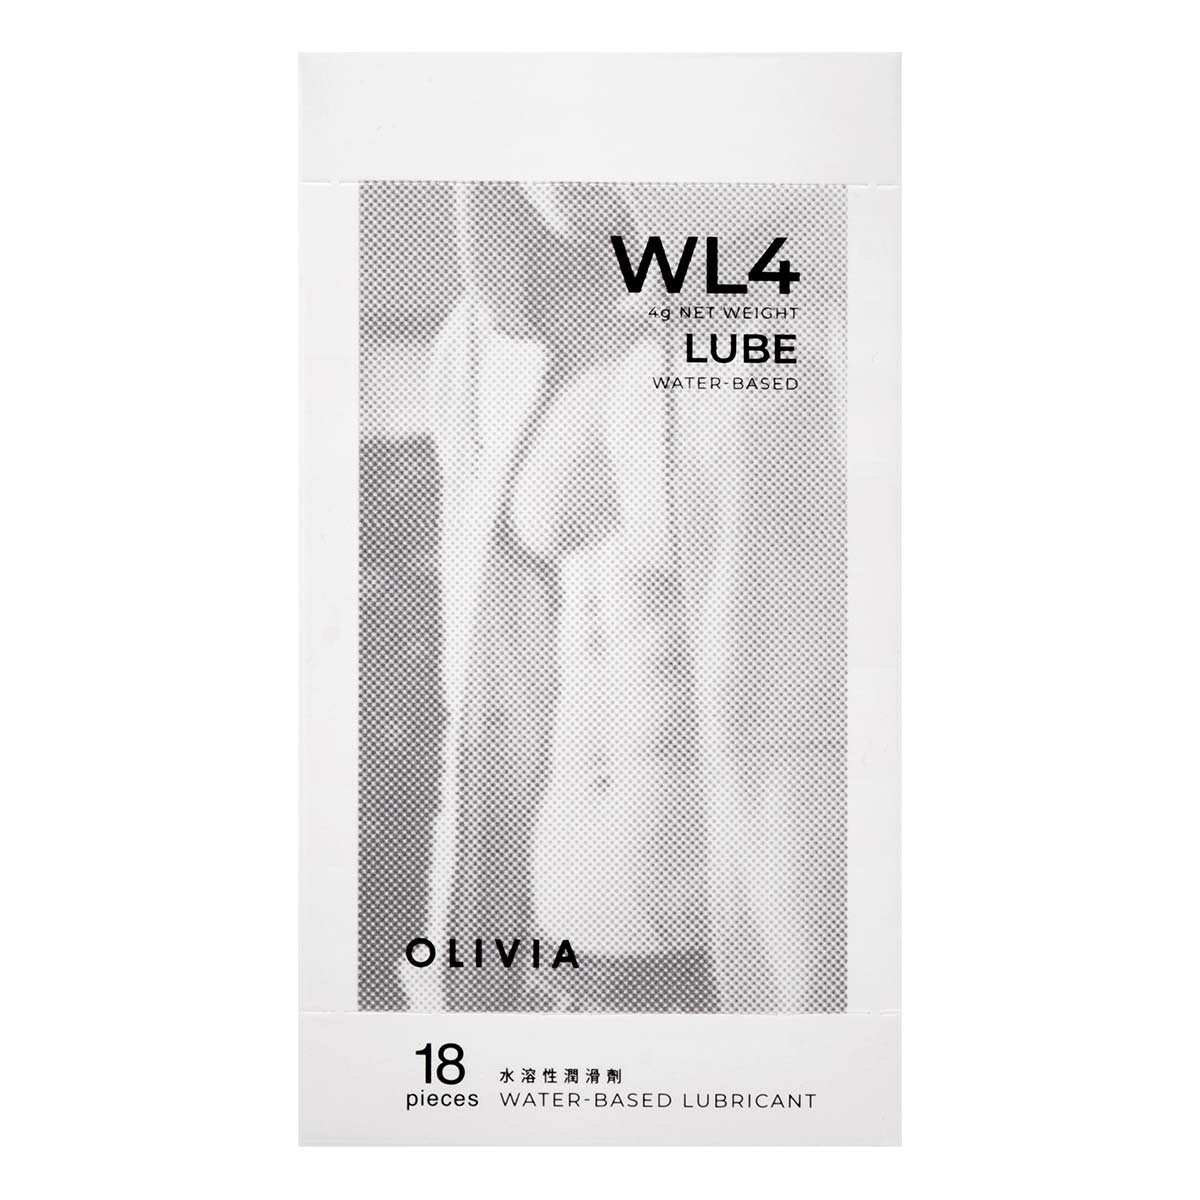 Olivia The Inner Man  4g (sachet) 18 pieces Water-based Lubricant-p_2